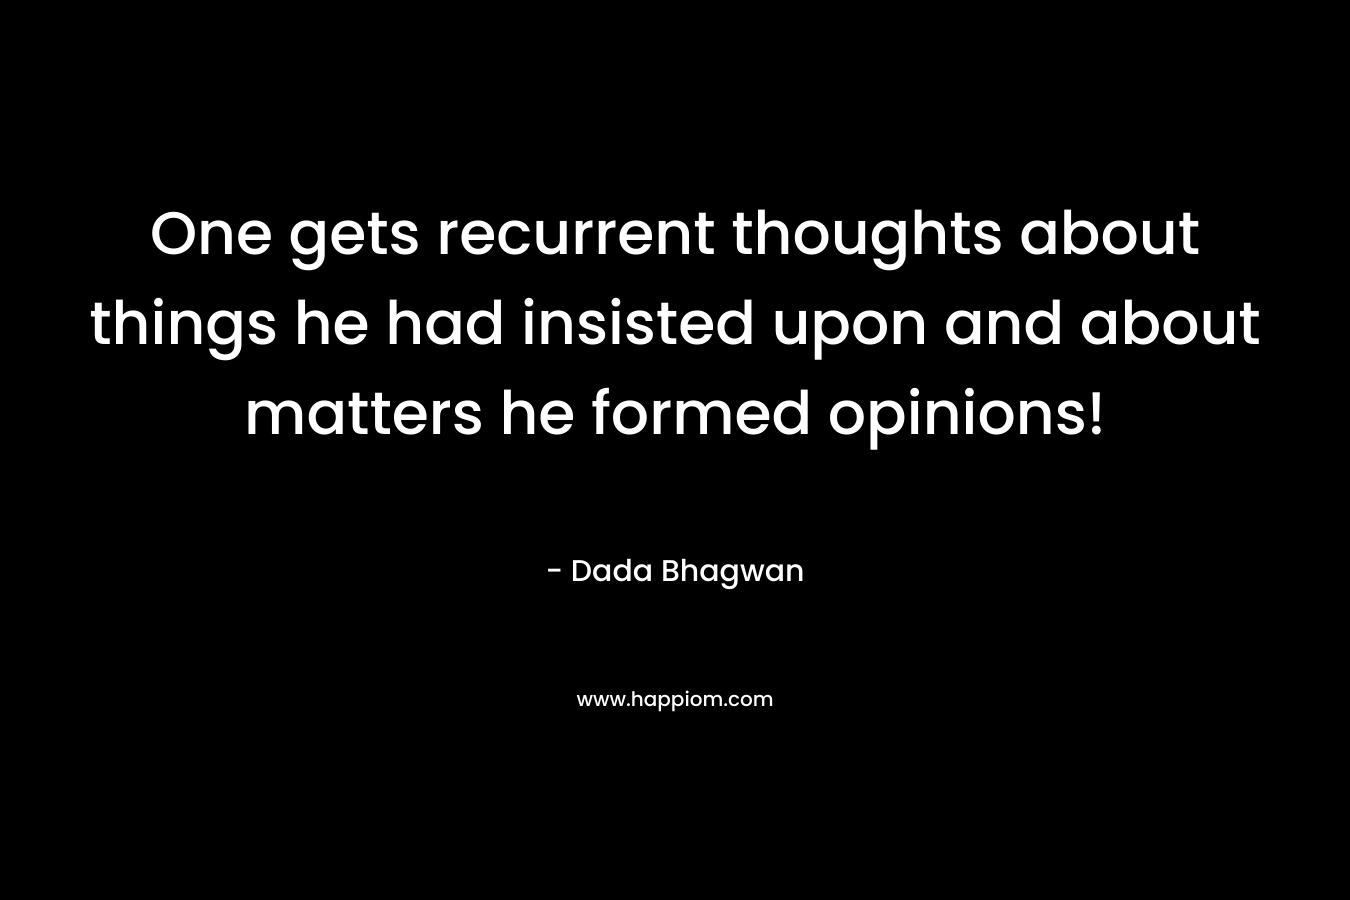 One gets recurrent thoughts about things he had insisted upon and about matters he formed opinions! – Dada Bhagwan